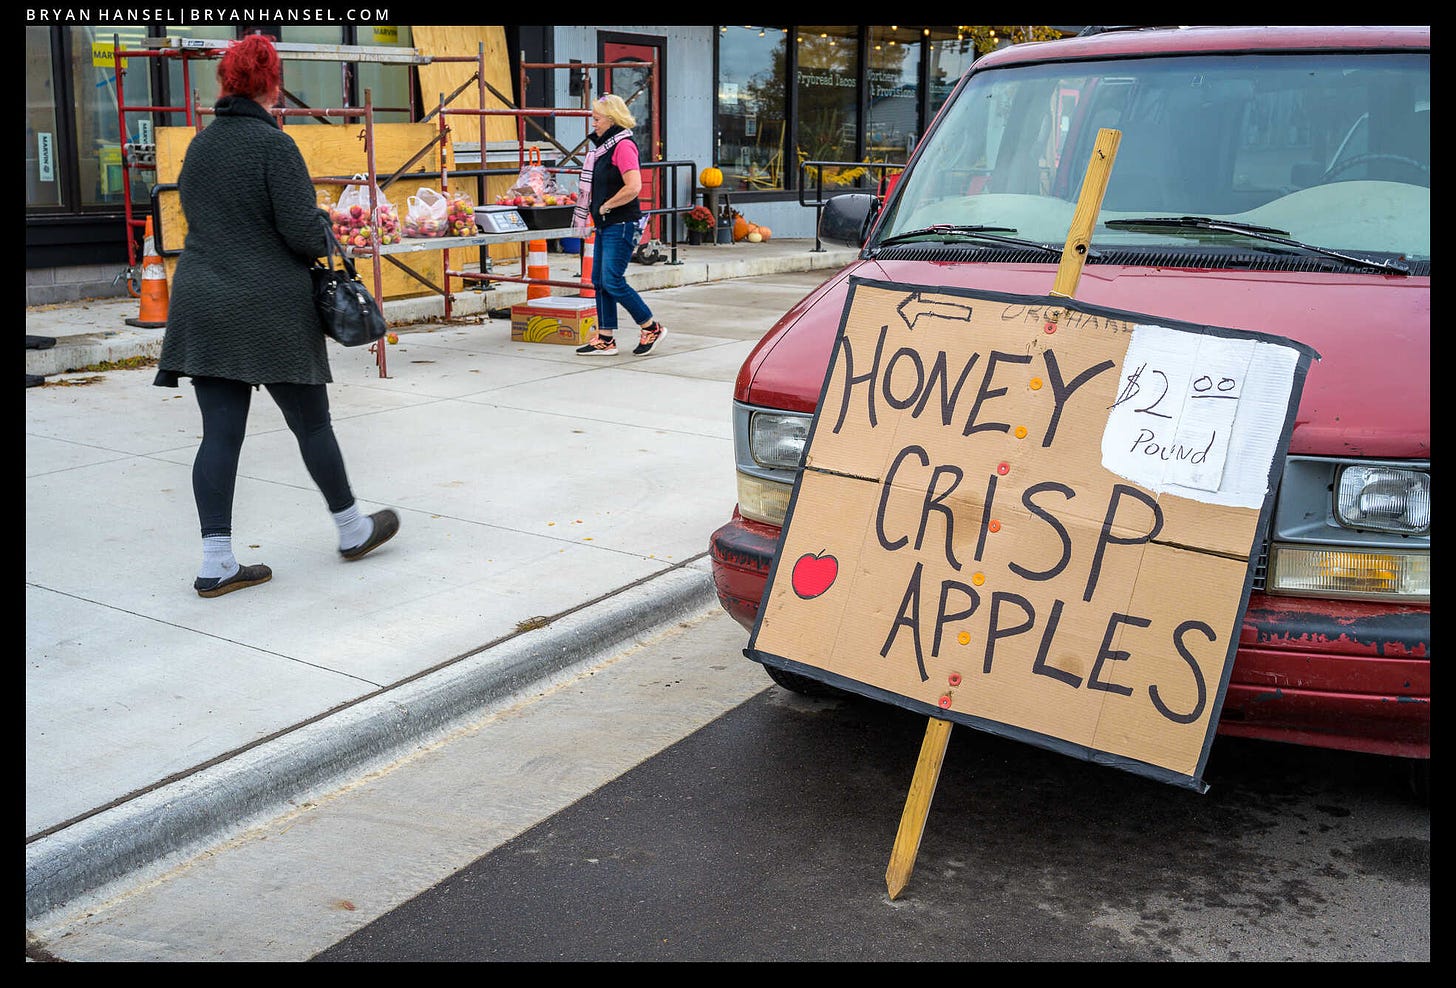 A sign that says, "Honey Crisp Apples" leaning against a red van. On construction scaffolding bags of apples sit. Two people walk past. One woman's hair is the same red as the van. 